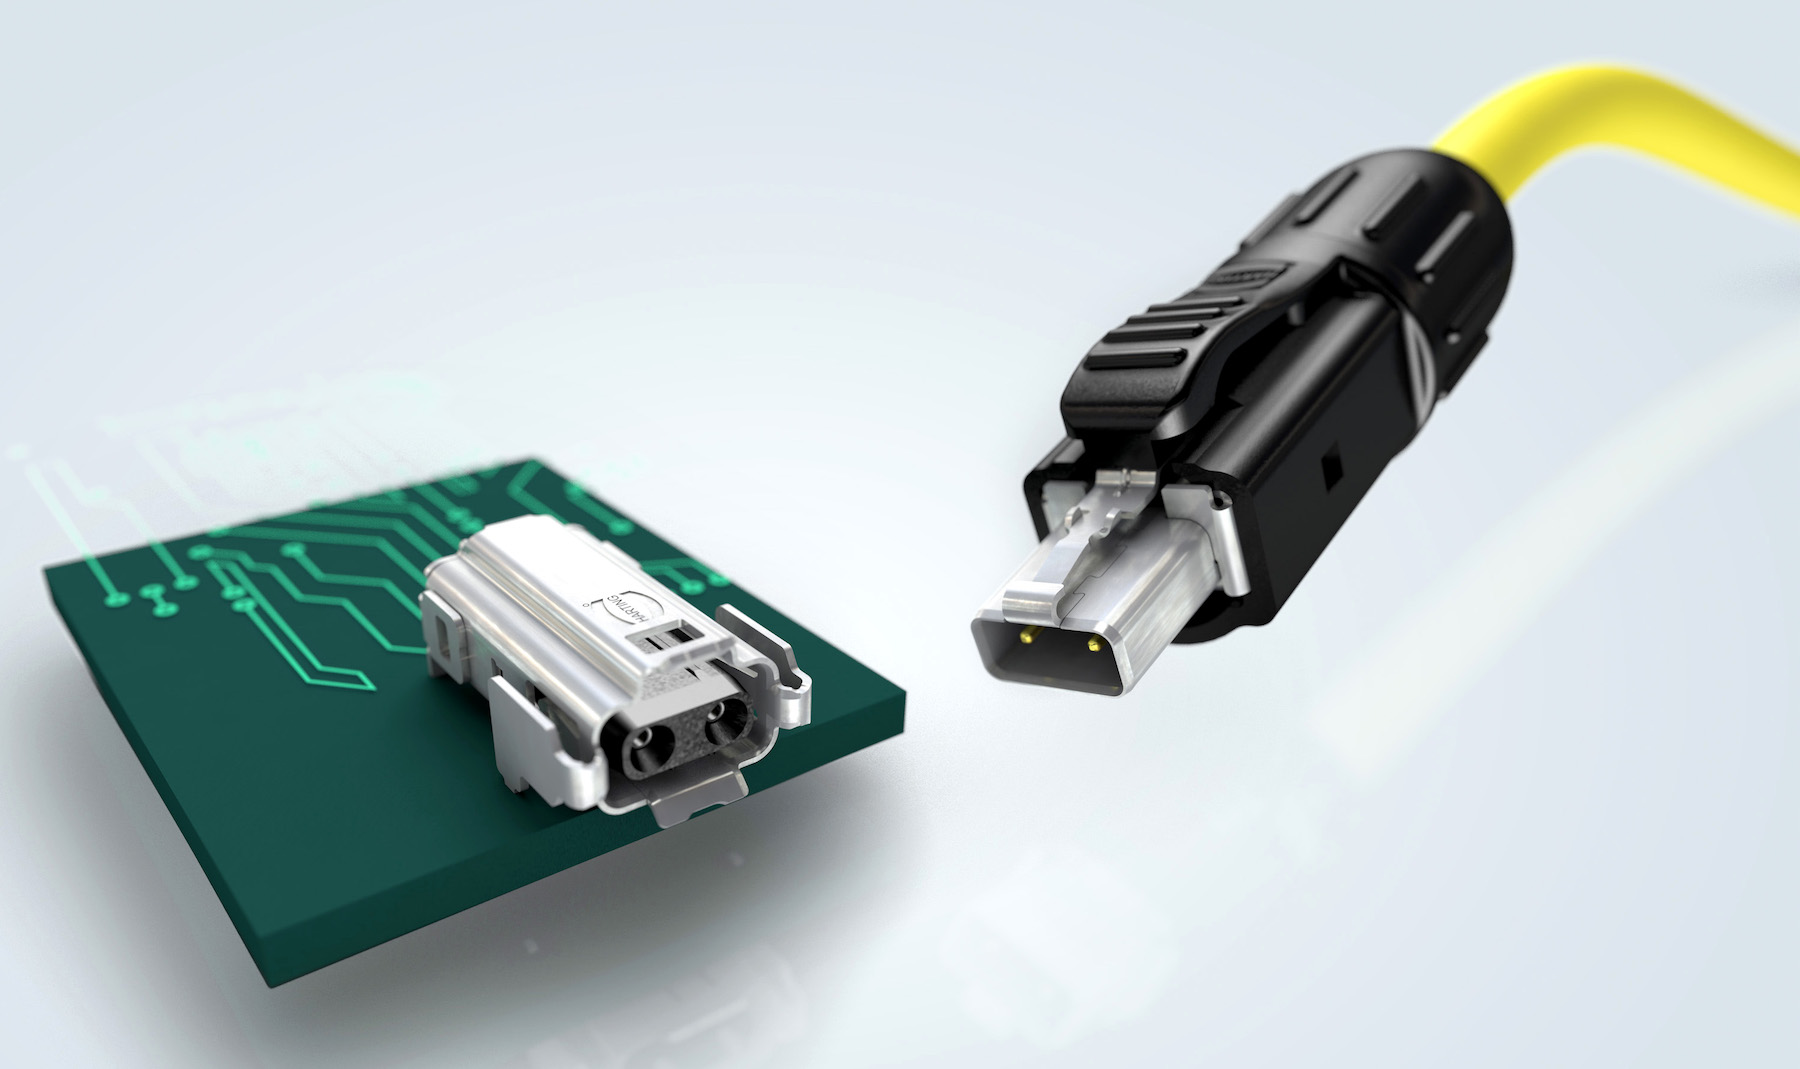 SPE connectors from HARTING